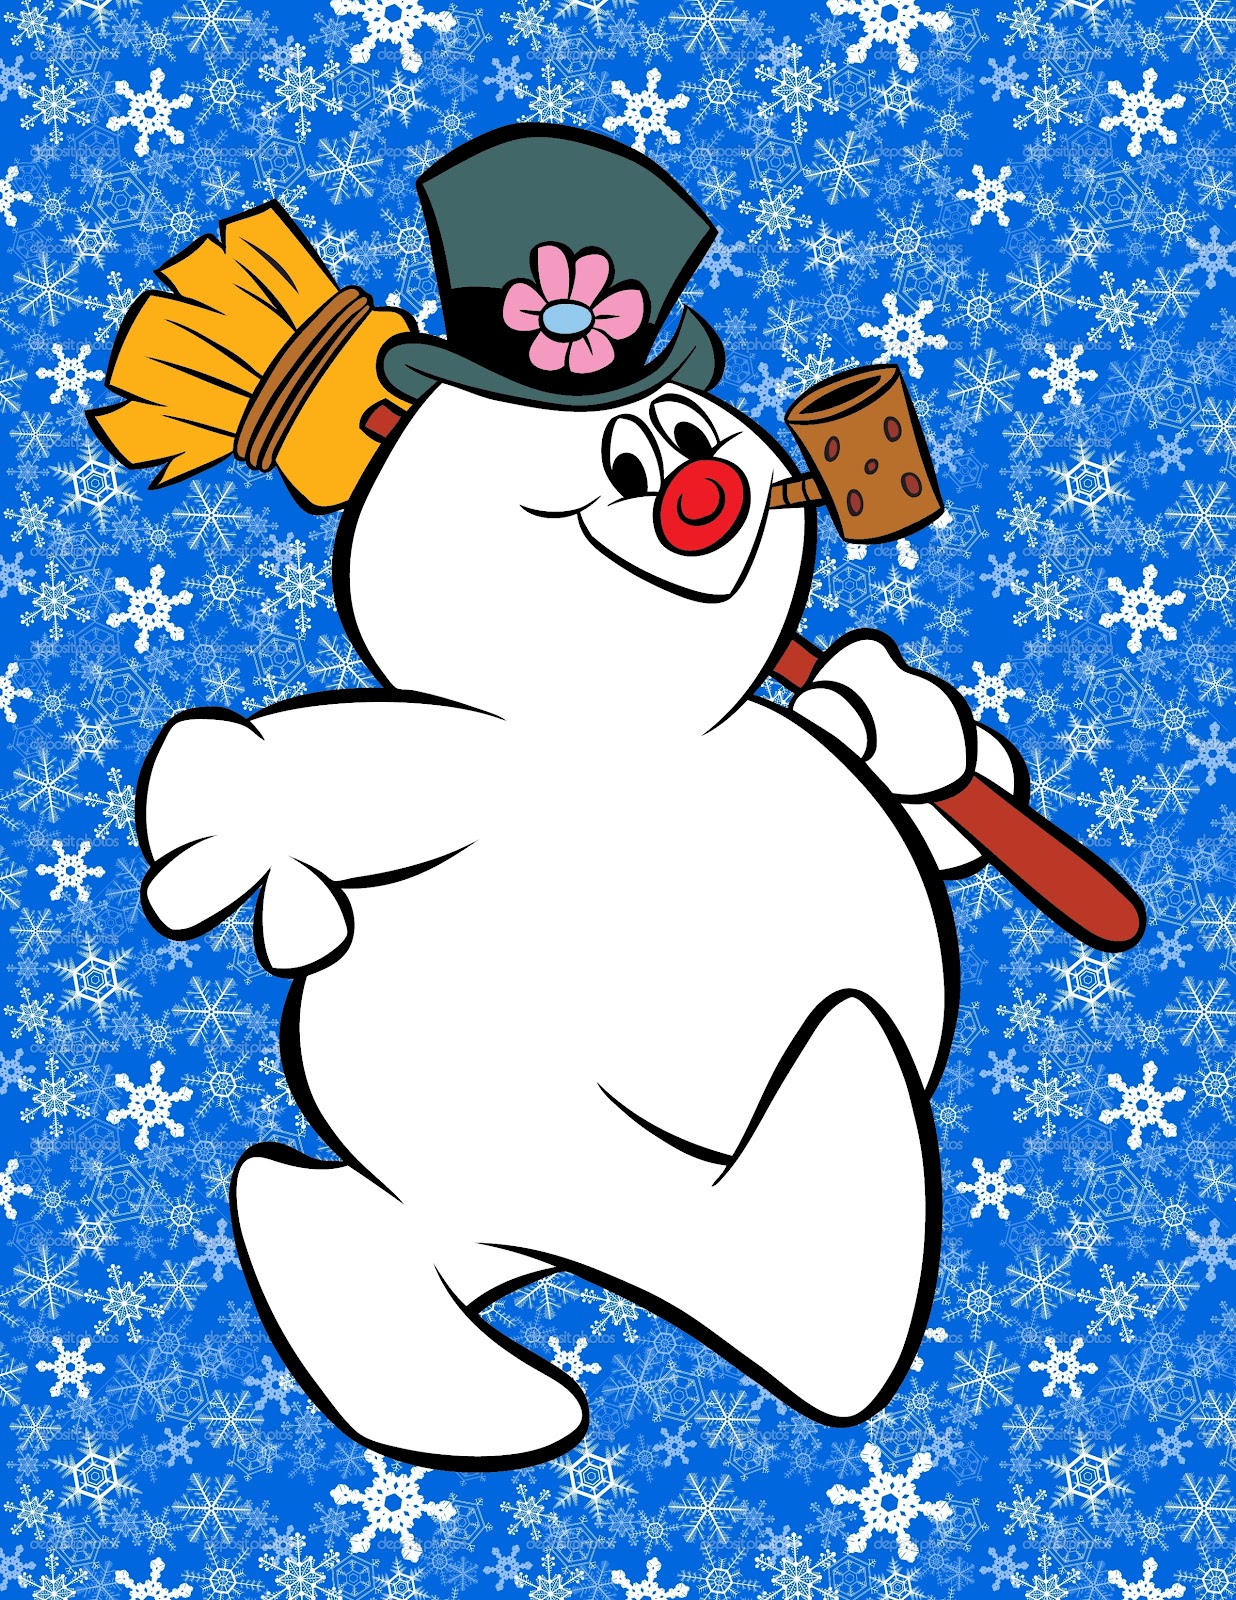 Frosty Snowman Background Image Amp Pictures Becuo